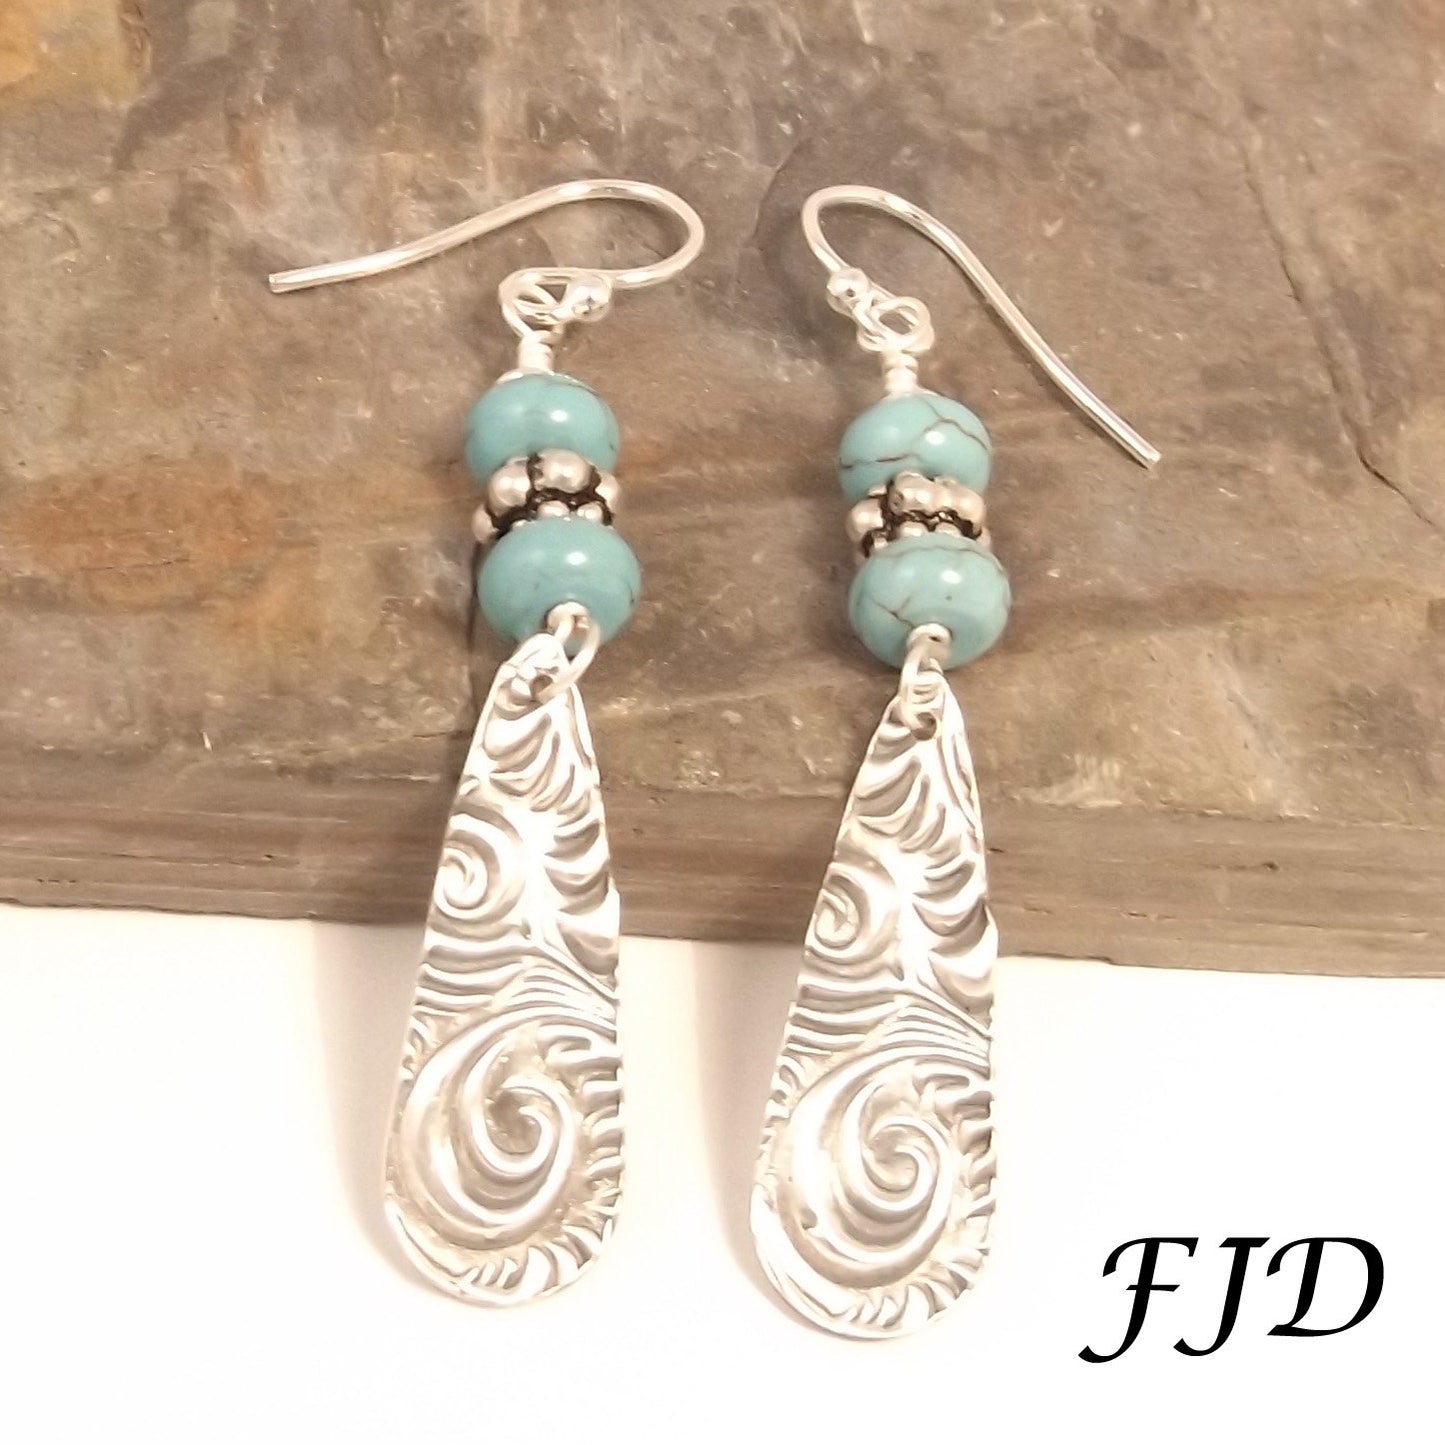 Silver and Turquoise Howlite Earrings